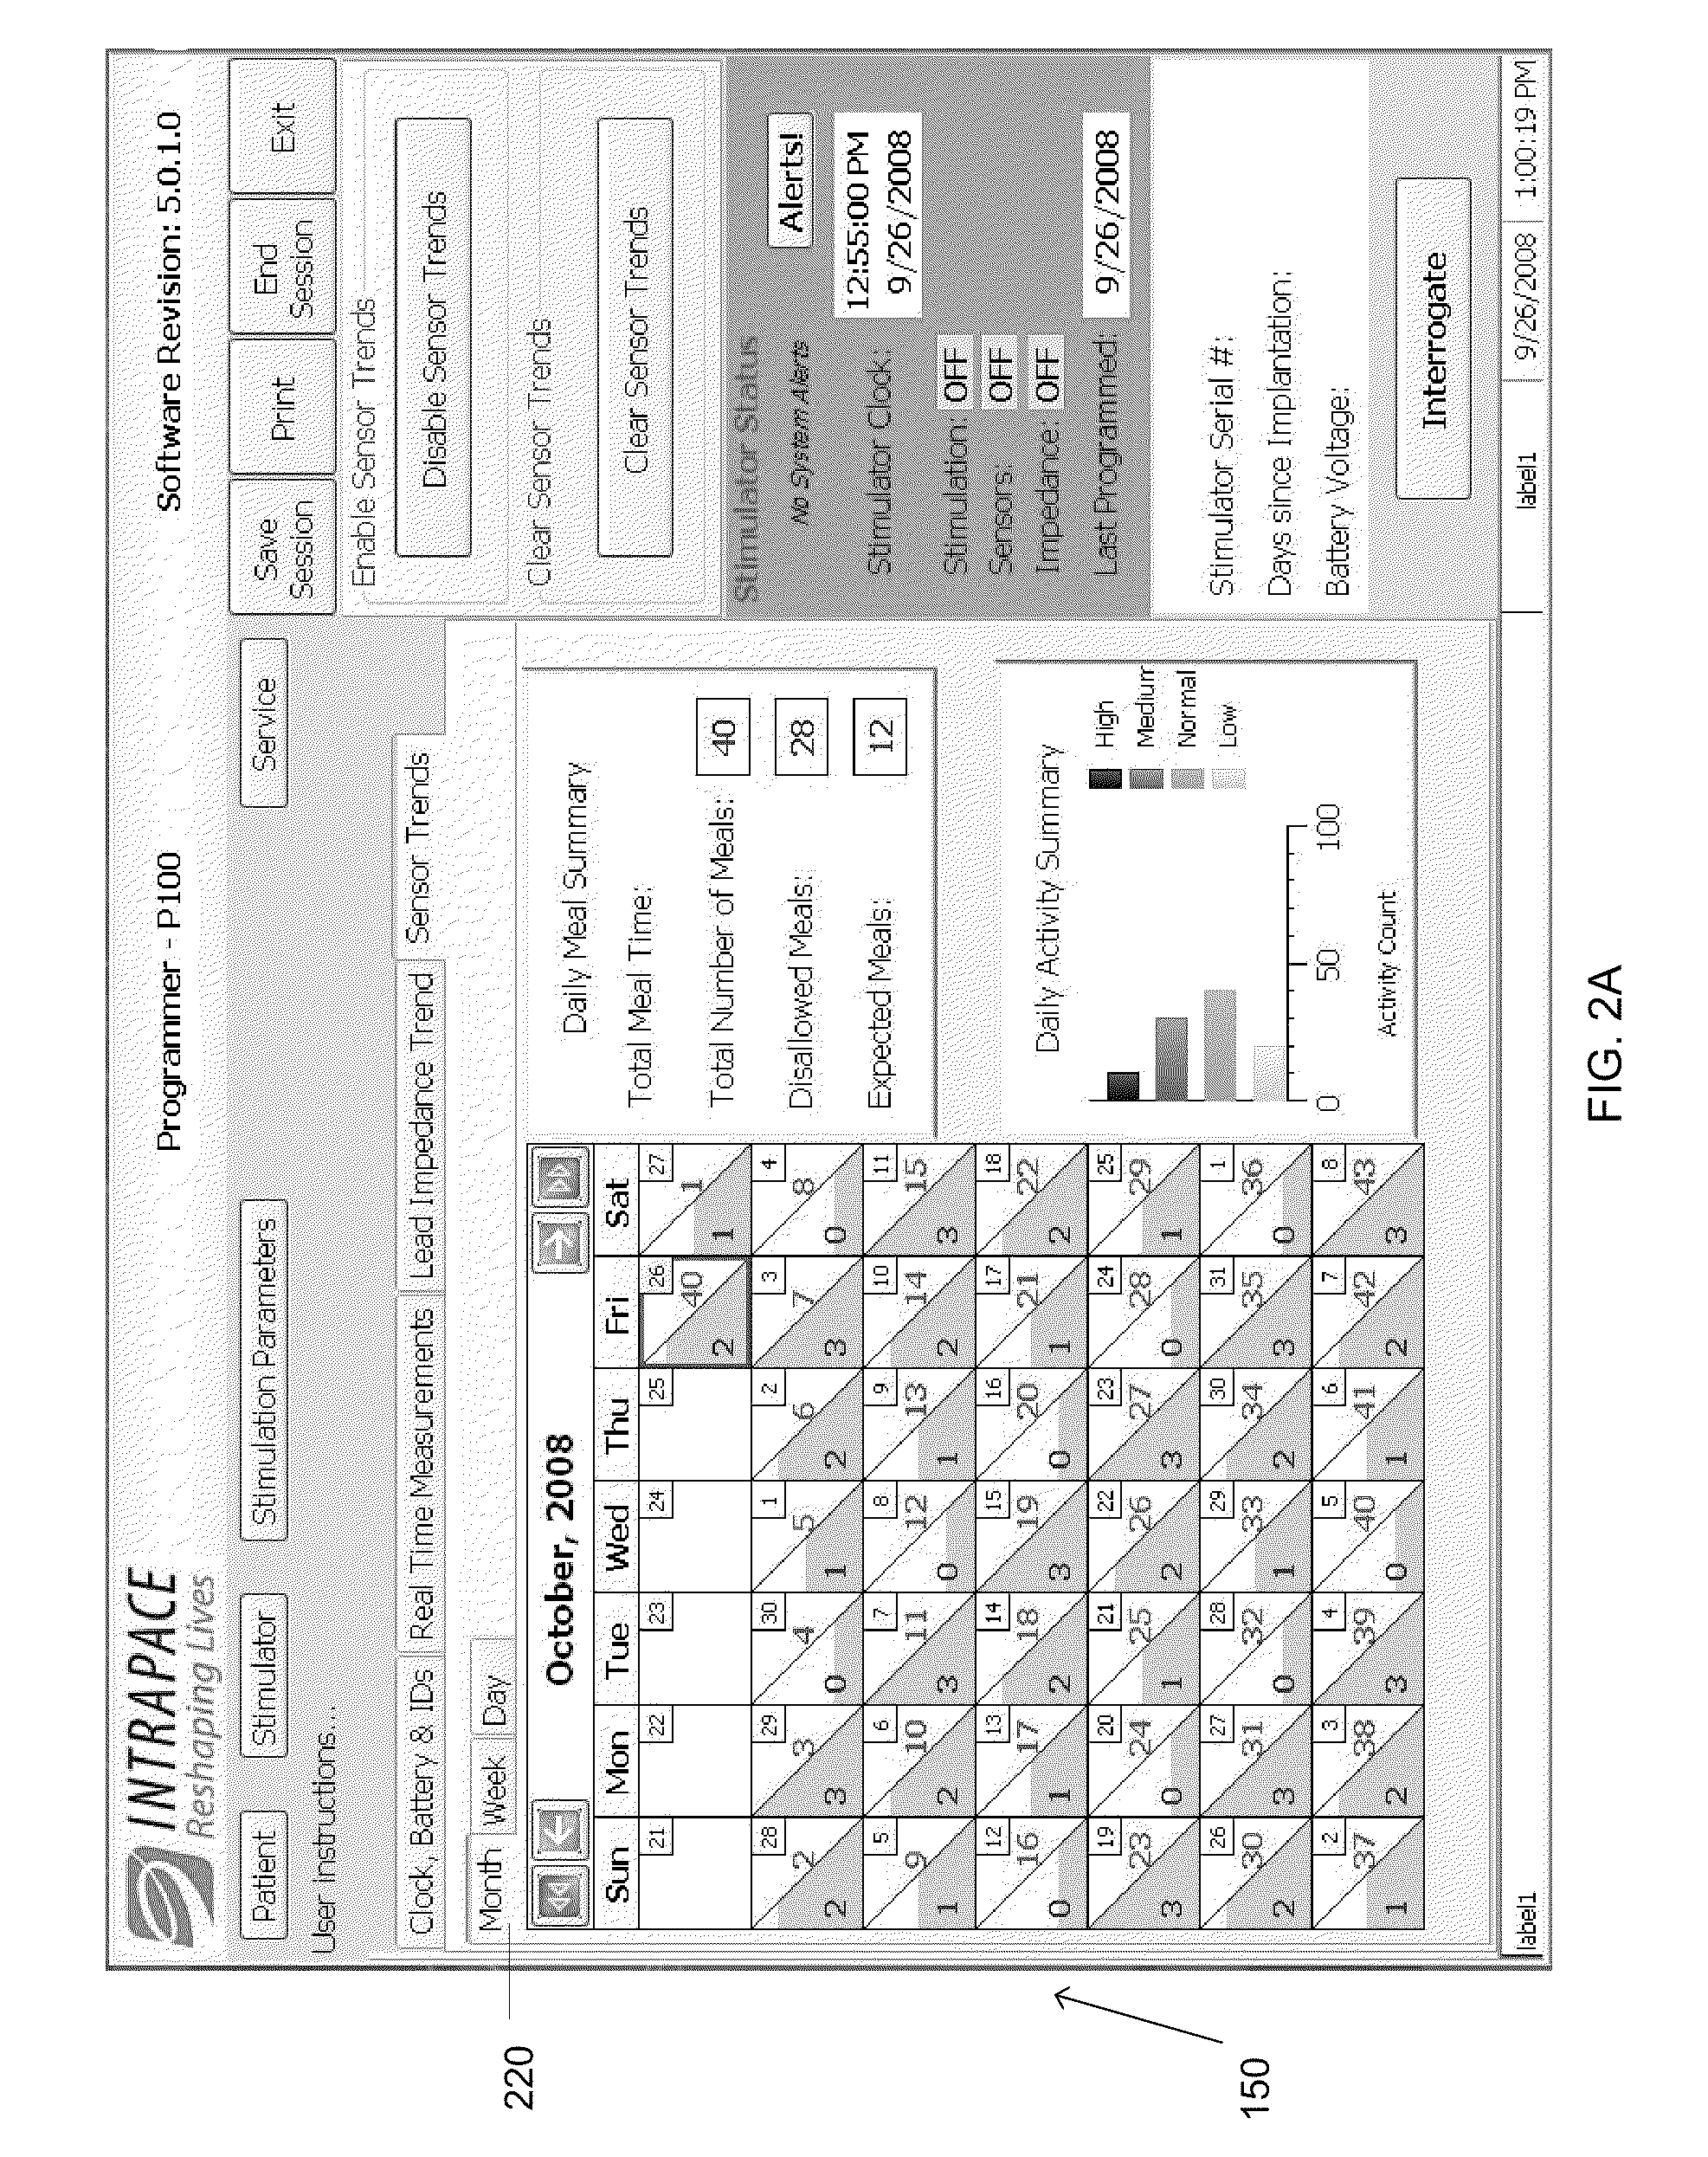 Feedback systems and methods for communicating diagnostic and/or treatment signals to enhance obesity treatments